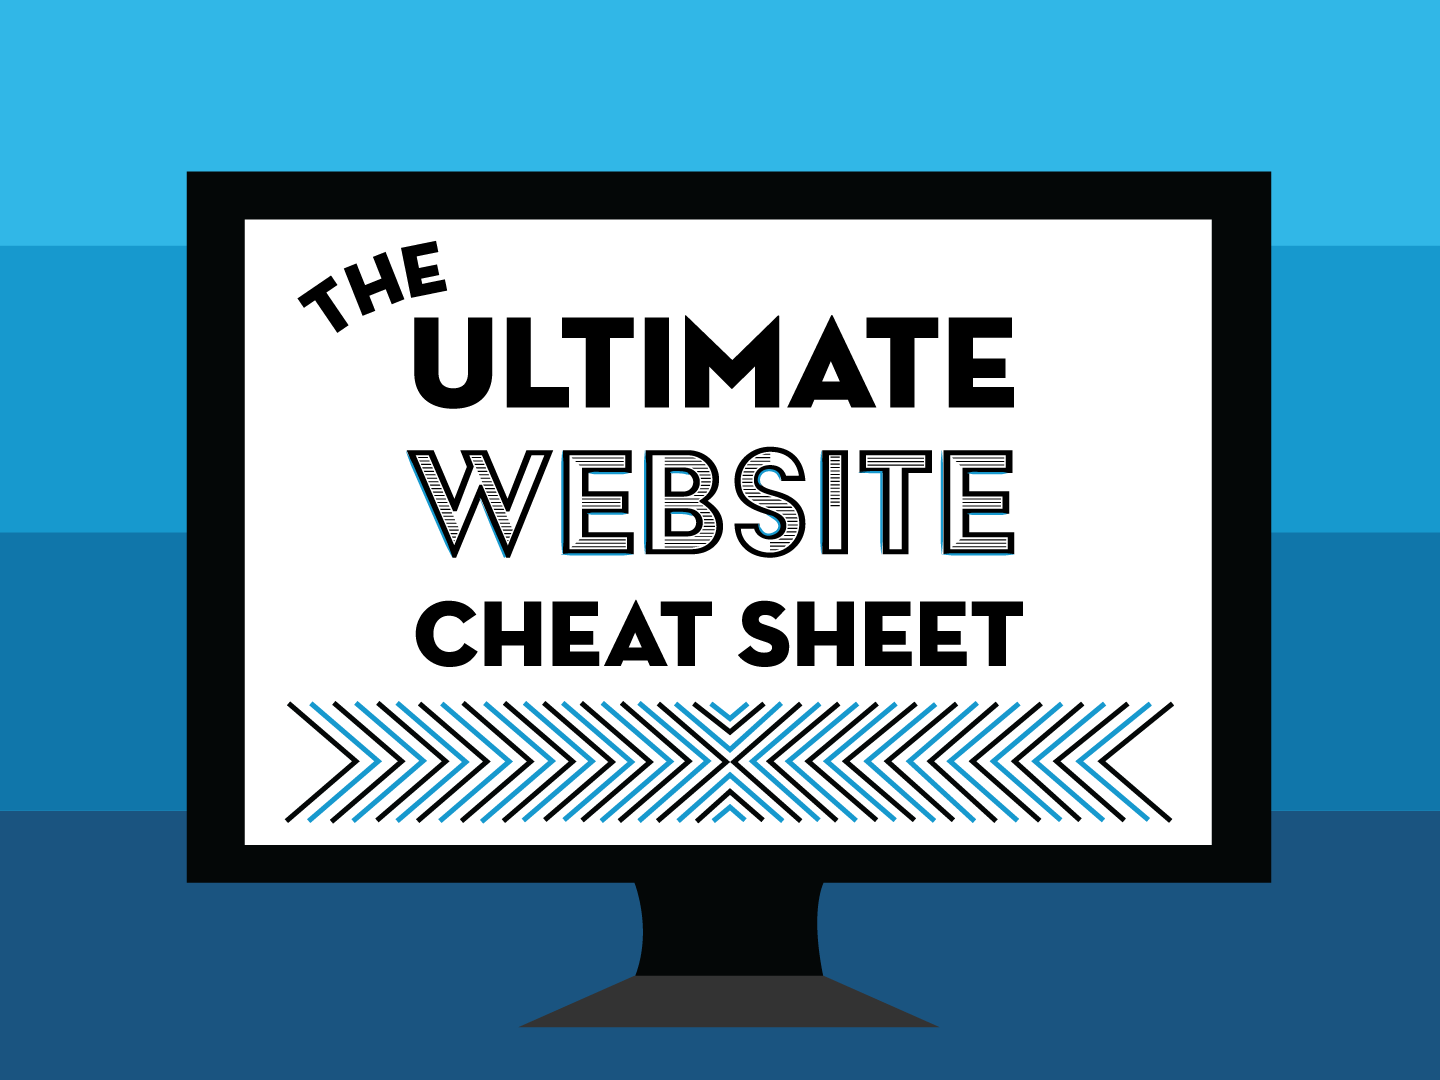 The Ultimate Website Cheat Sheet